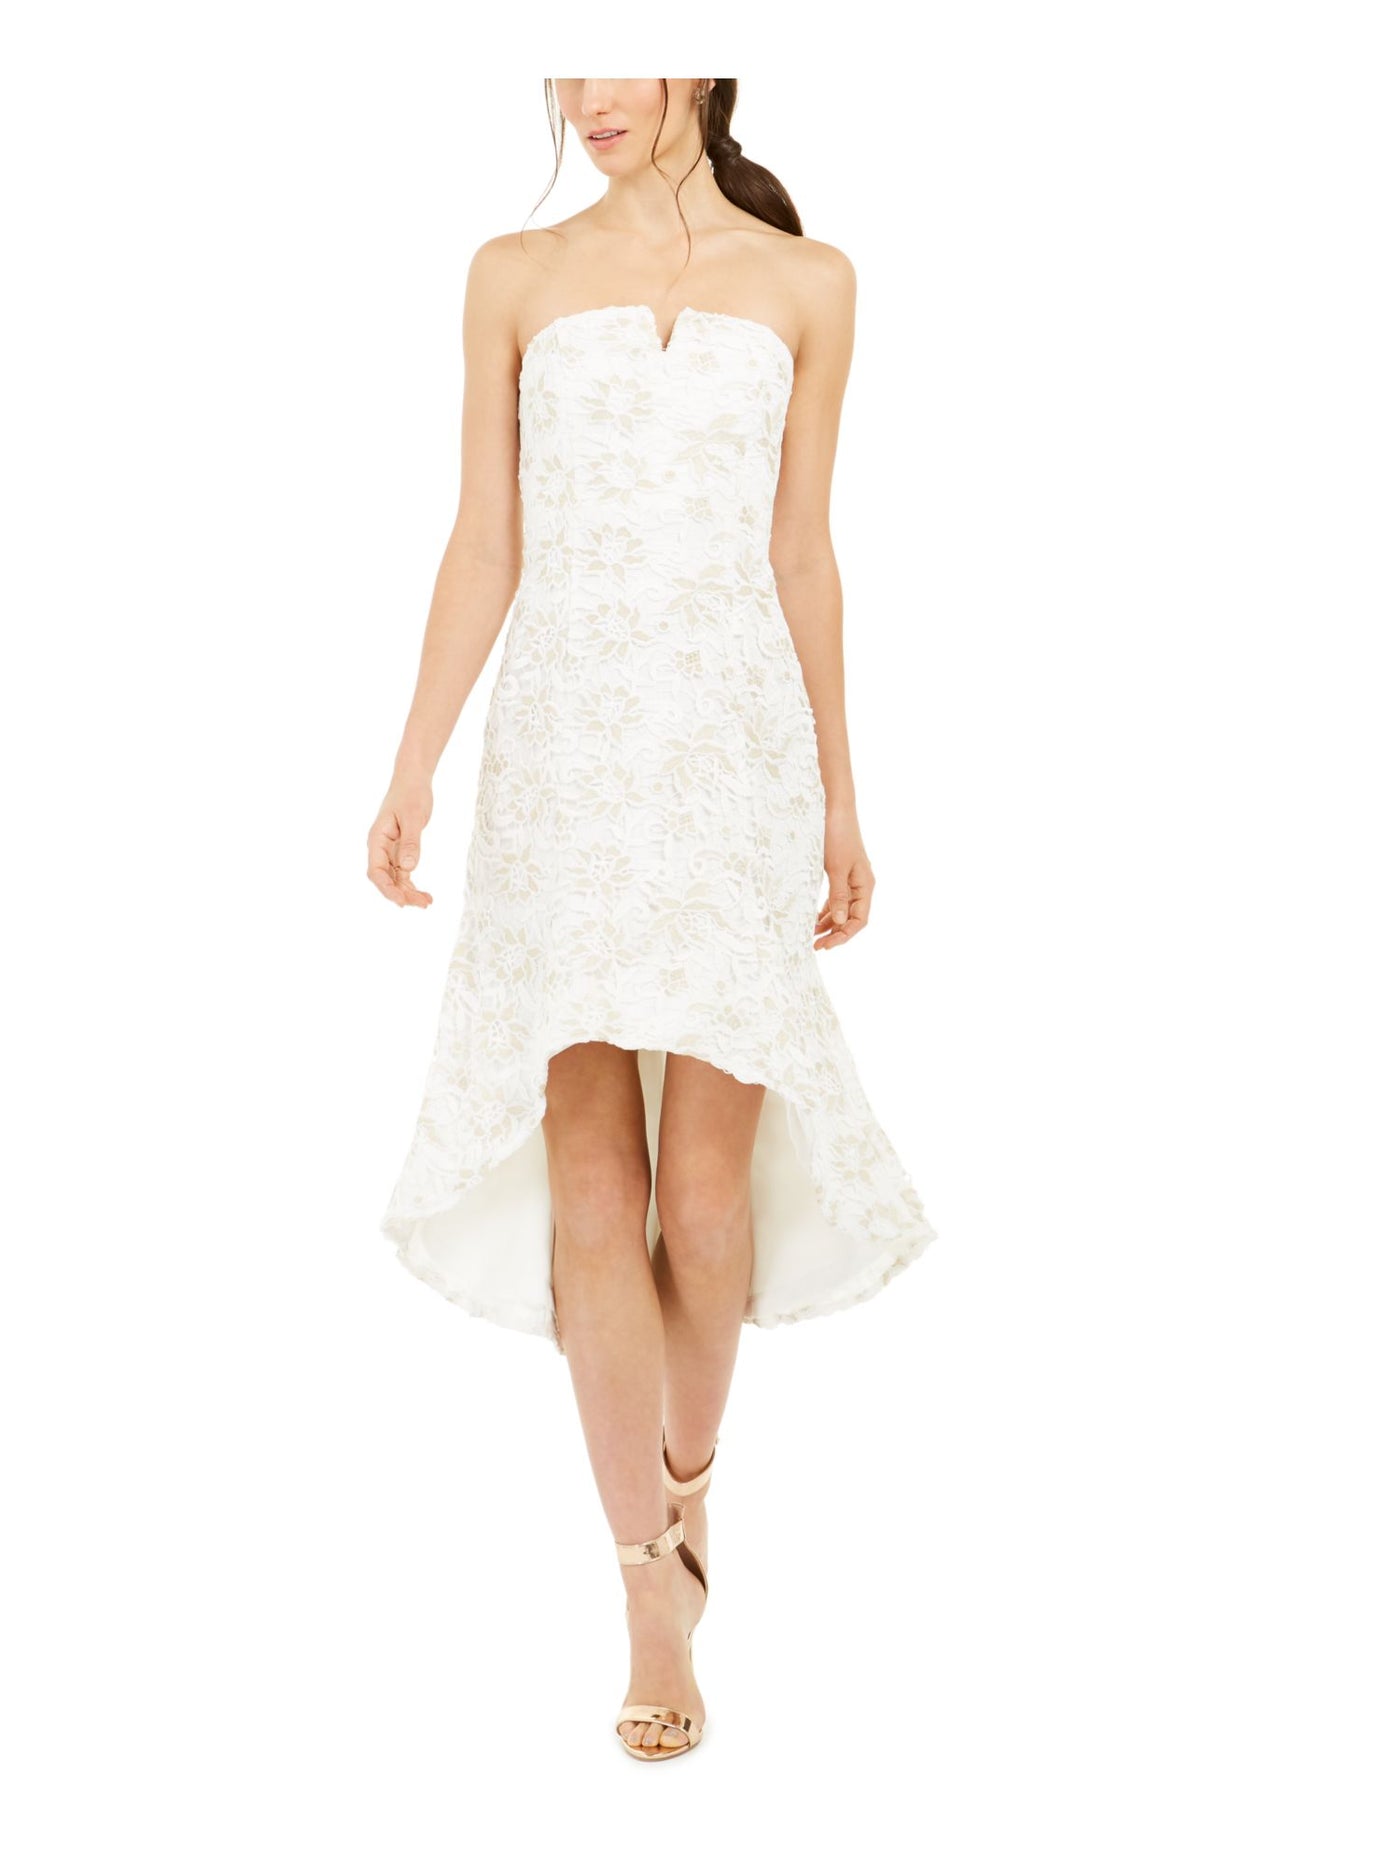 ADRIANNA PAPELL Womens White Zippered Lace Floral Strapless Below The Knee Evening Hi-Lo Dress 4